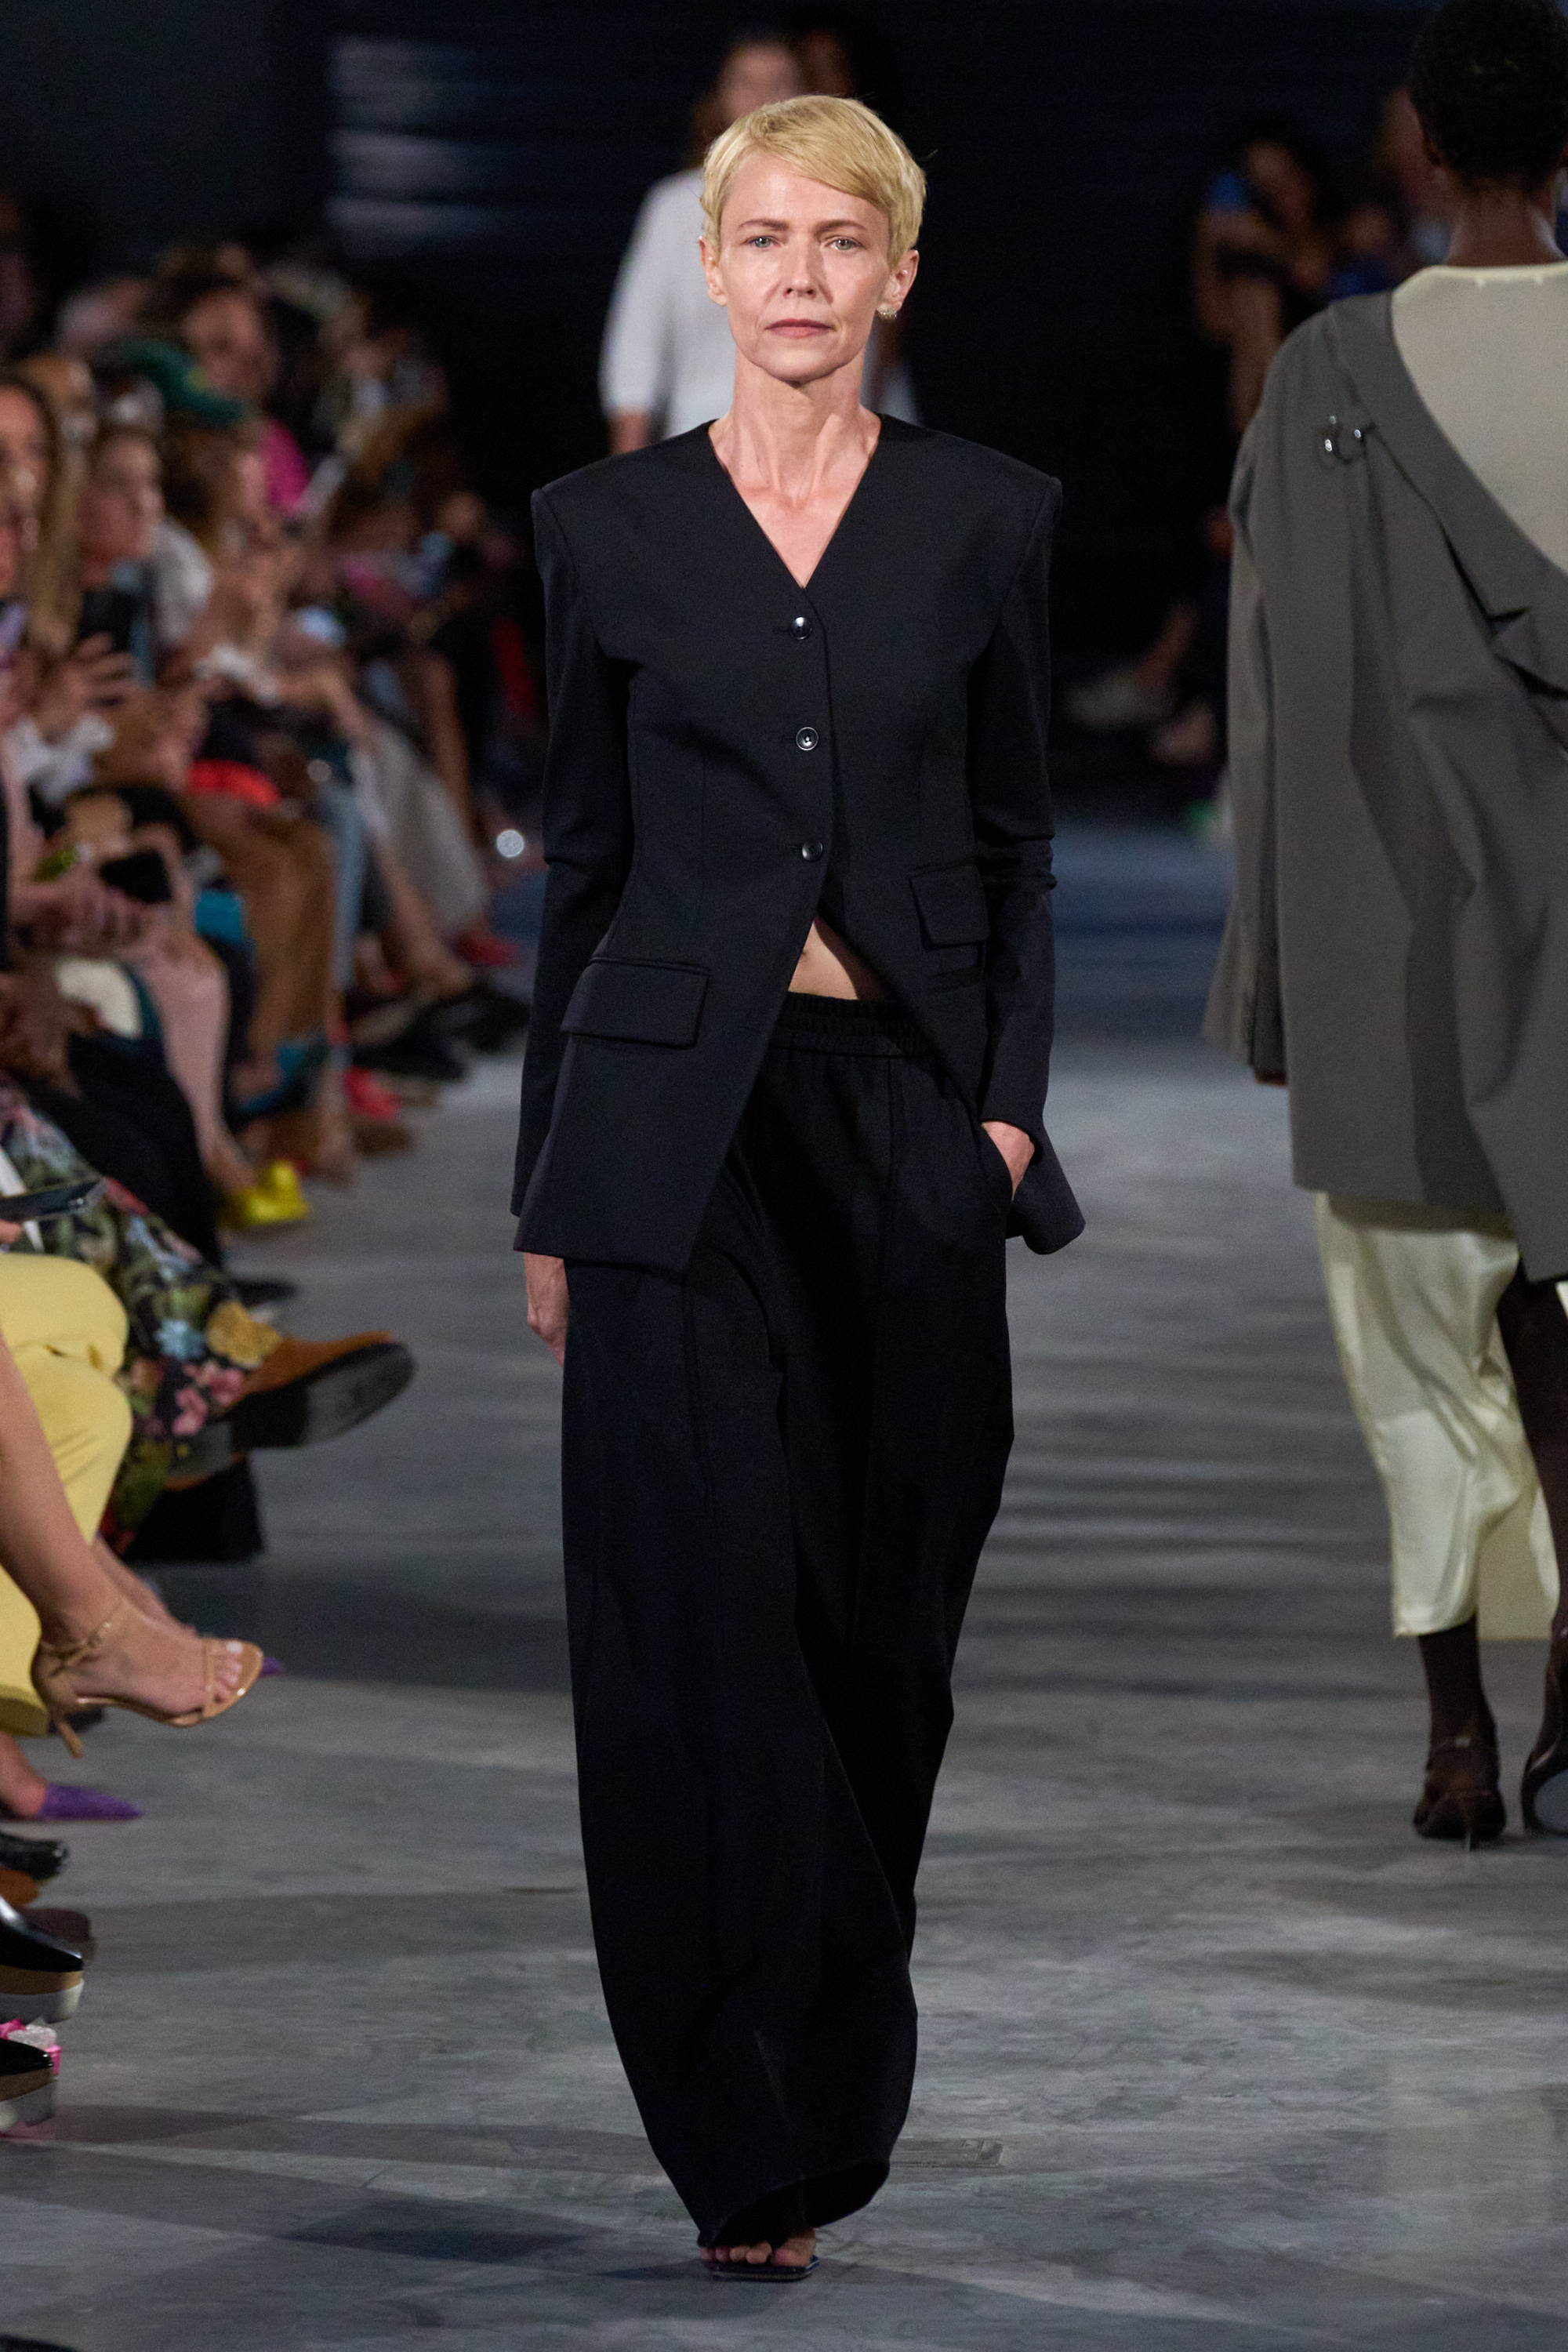 Model on a runway wearing blazer and pants